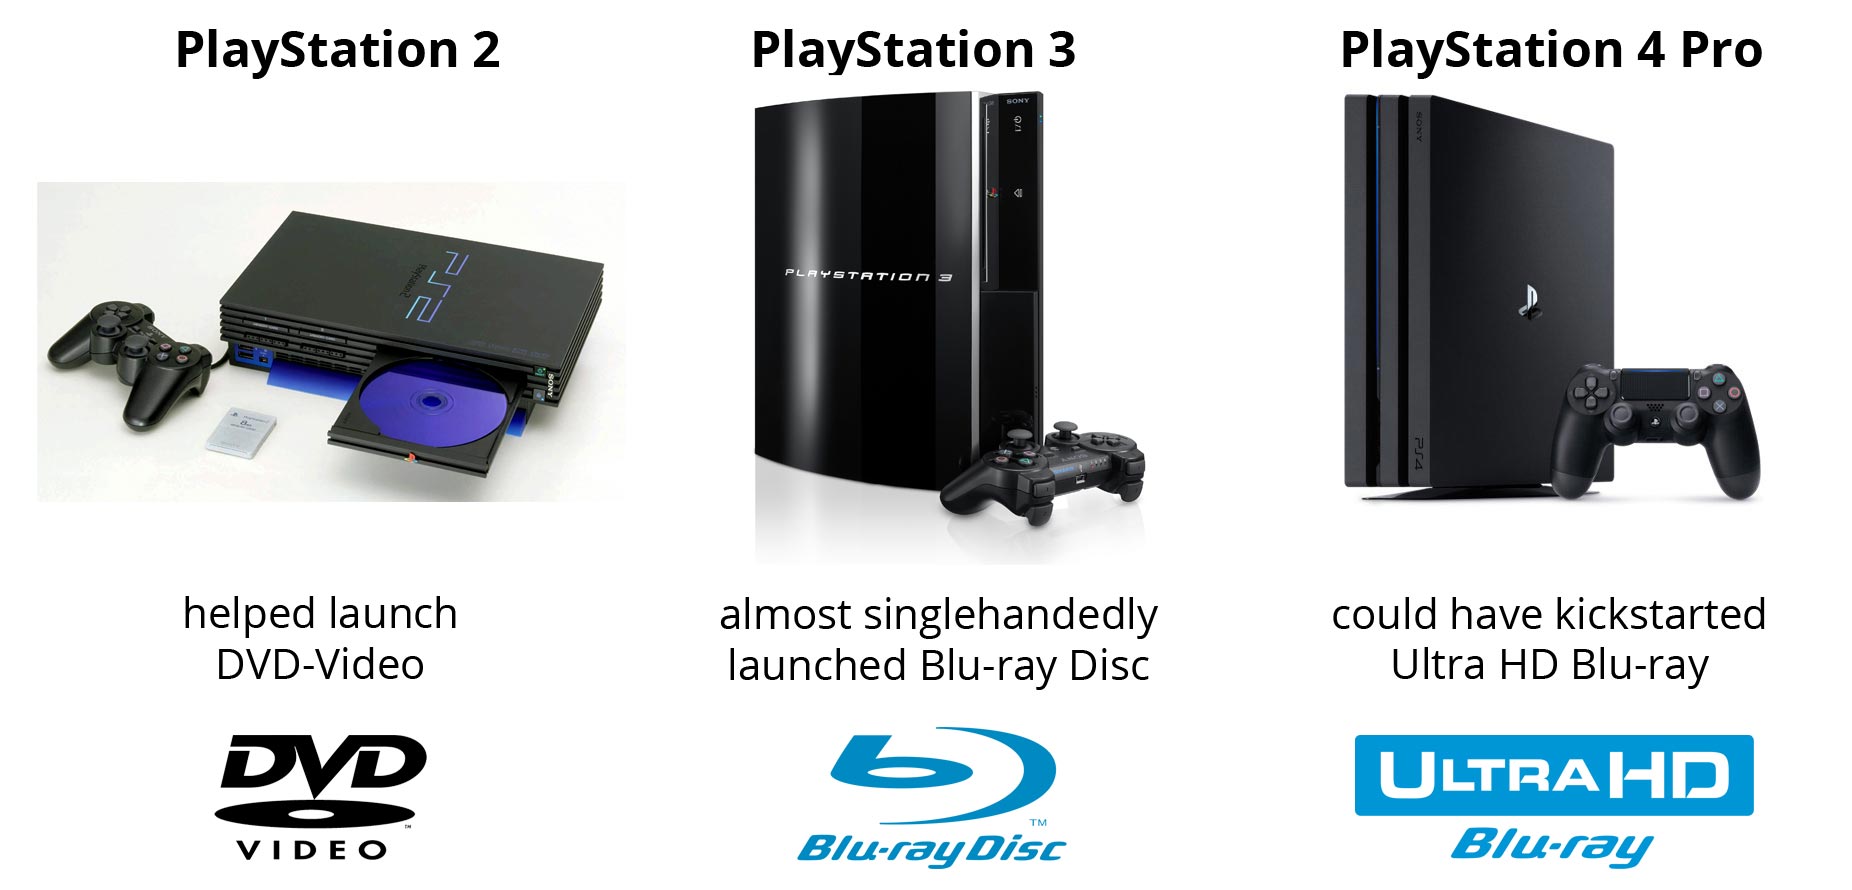 5 Reasons Why The Ps4 Pro Should Have An Ultra Hd Blu Ray Drive Flatpanelshd